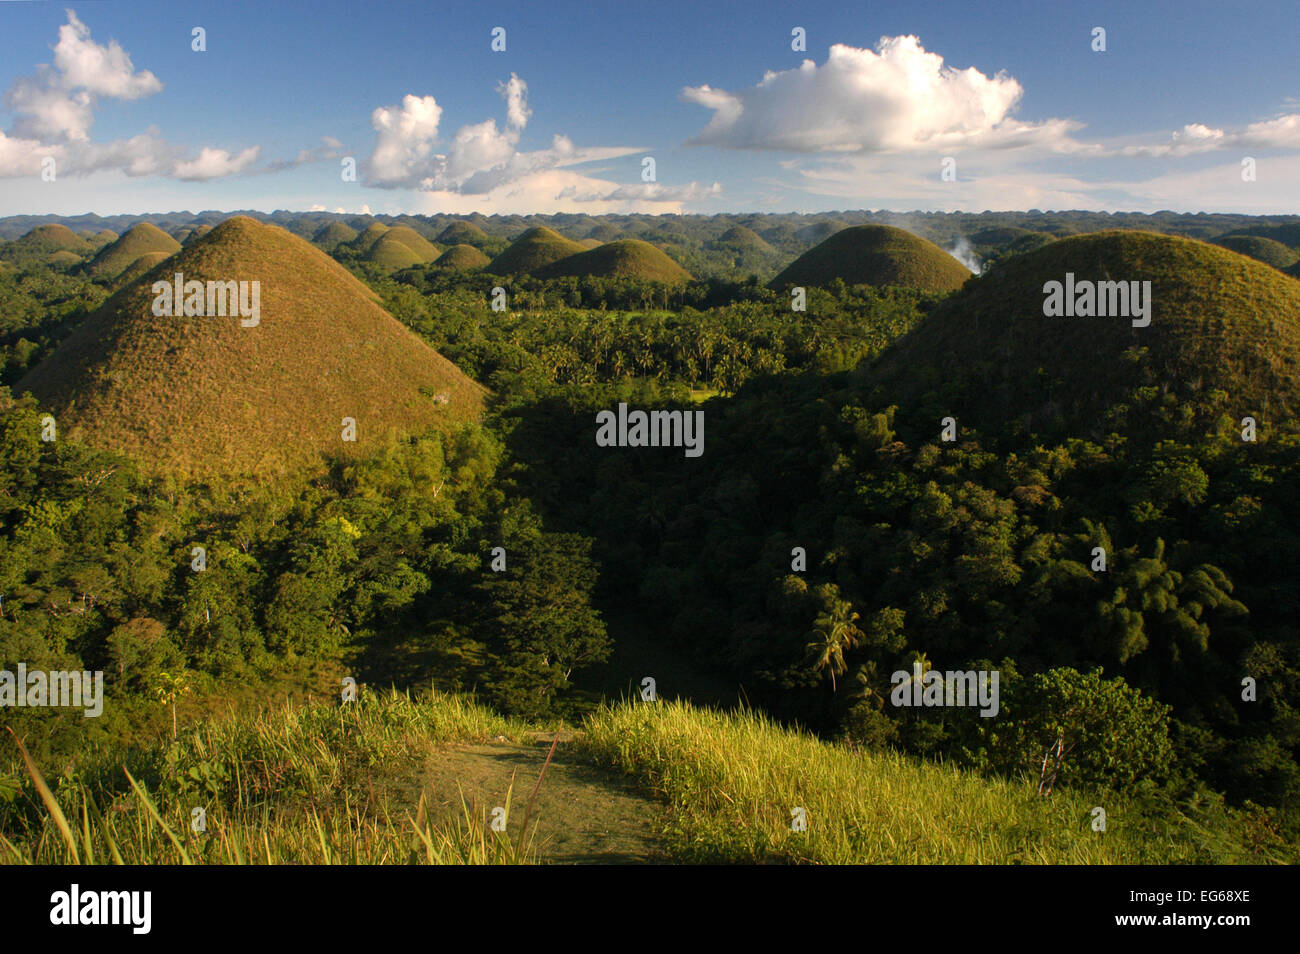 Mountains Chocolate Hills. Bohol. The Visayas. Philippines. The Chocolate Hills are a geological formation in Bohol Province, Ph Stock Photo